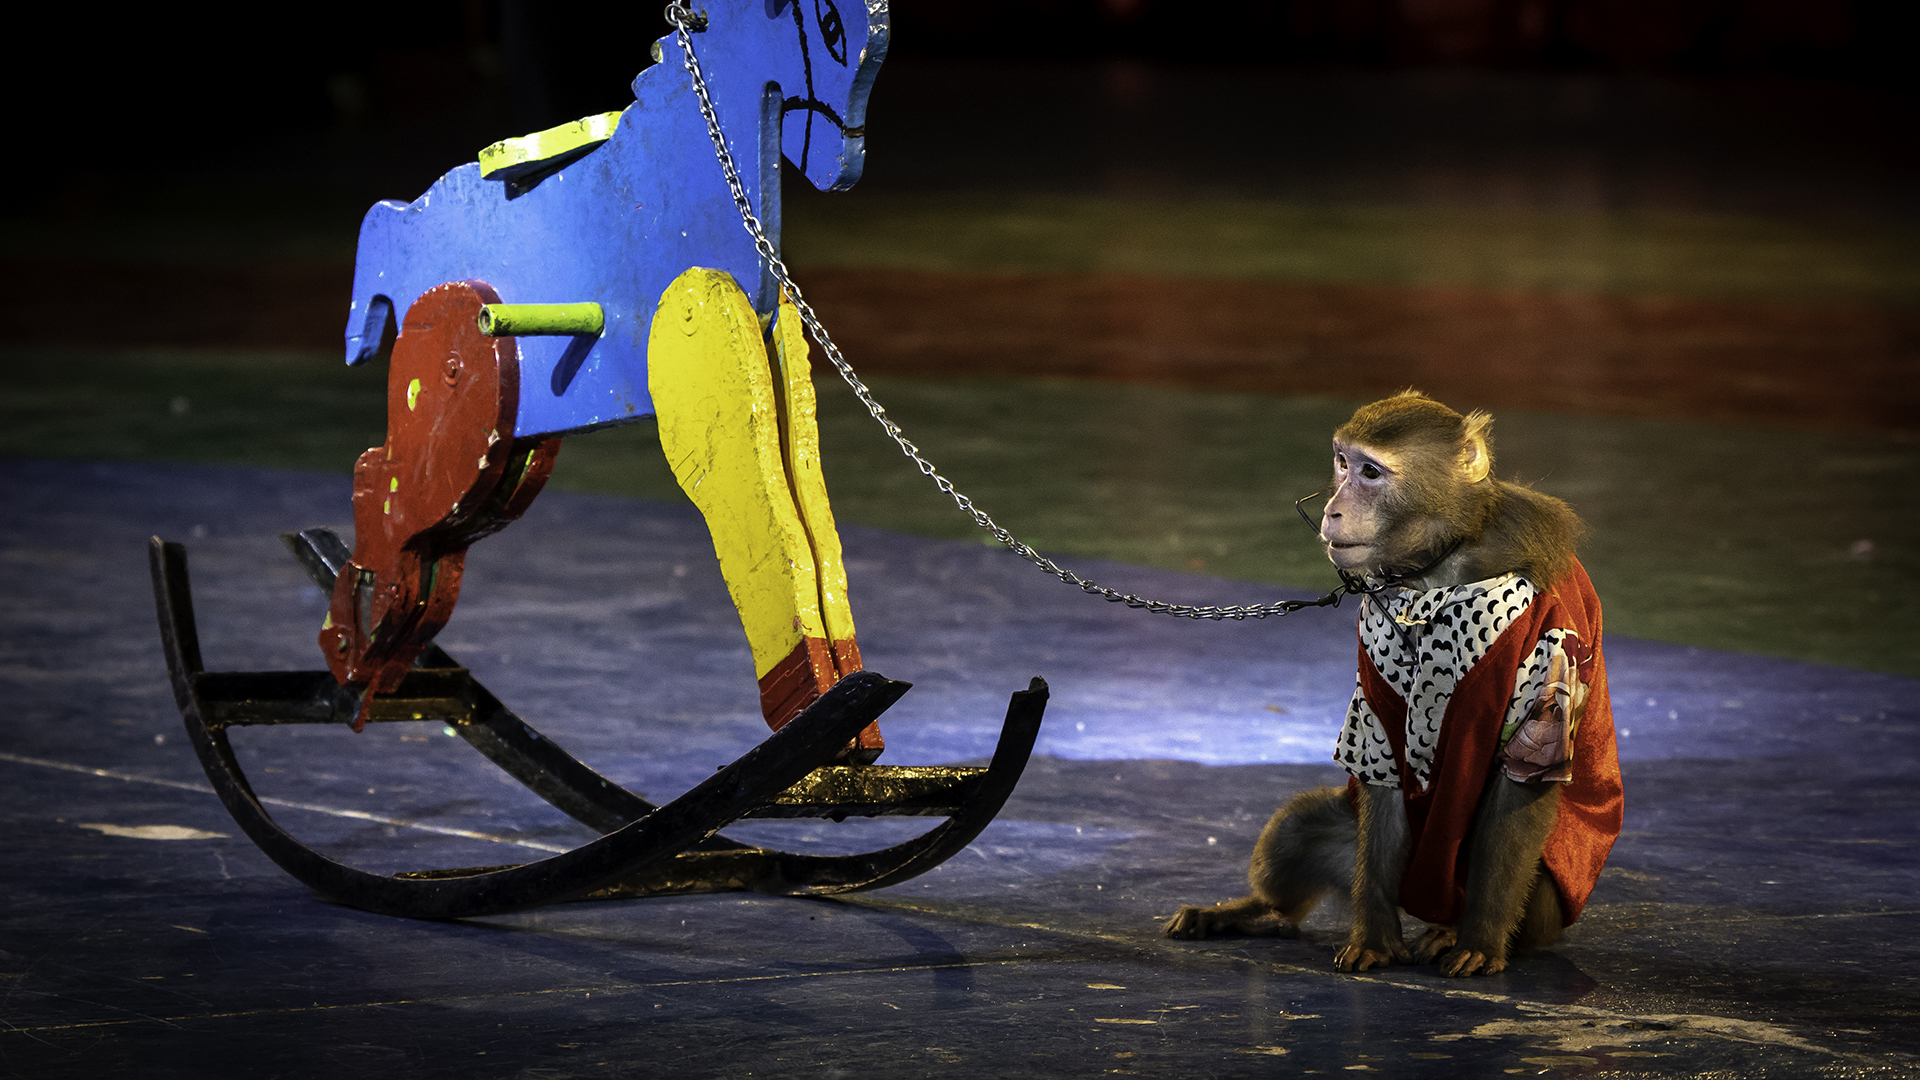 A monkey chained to a rocking horse